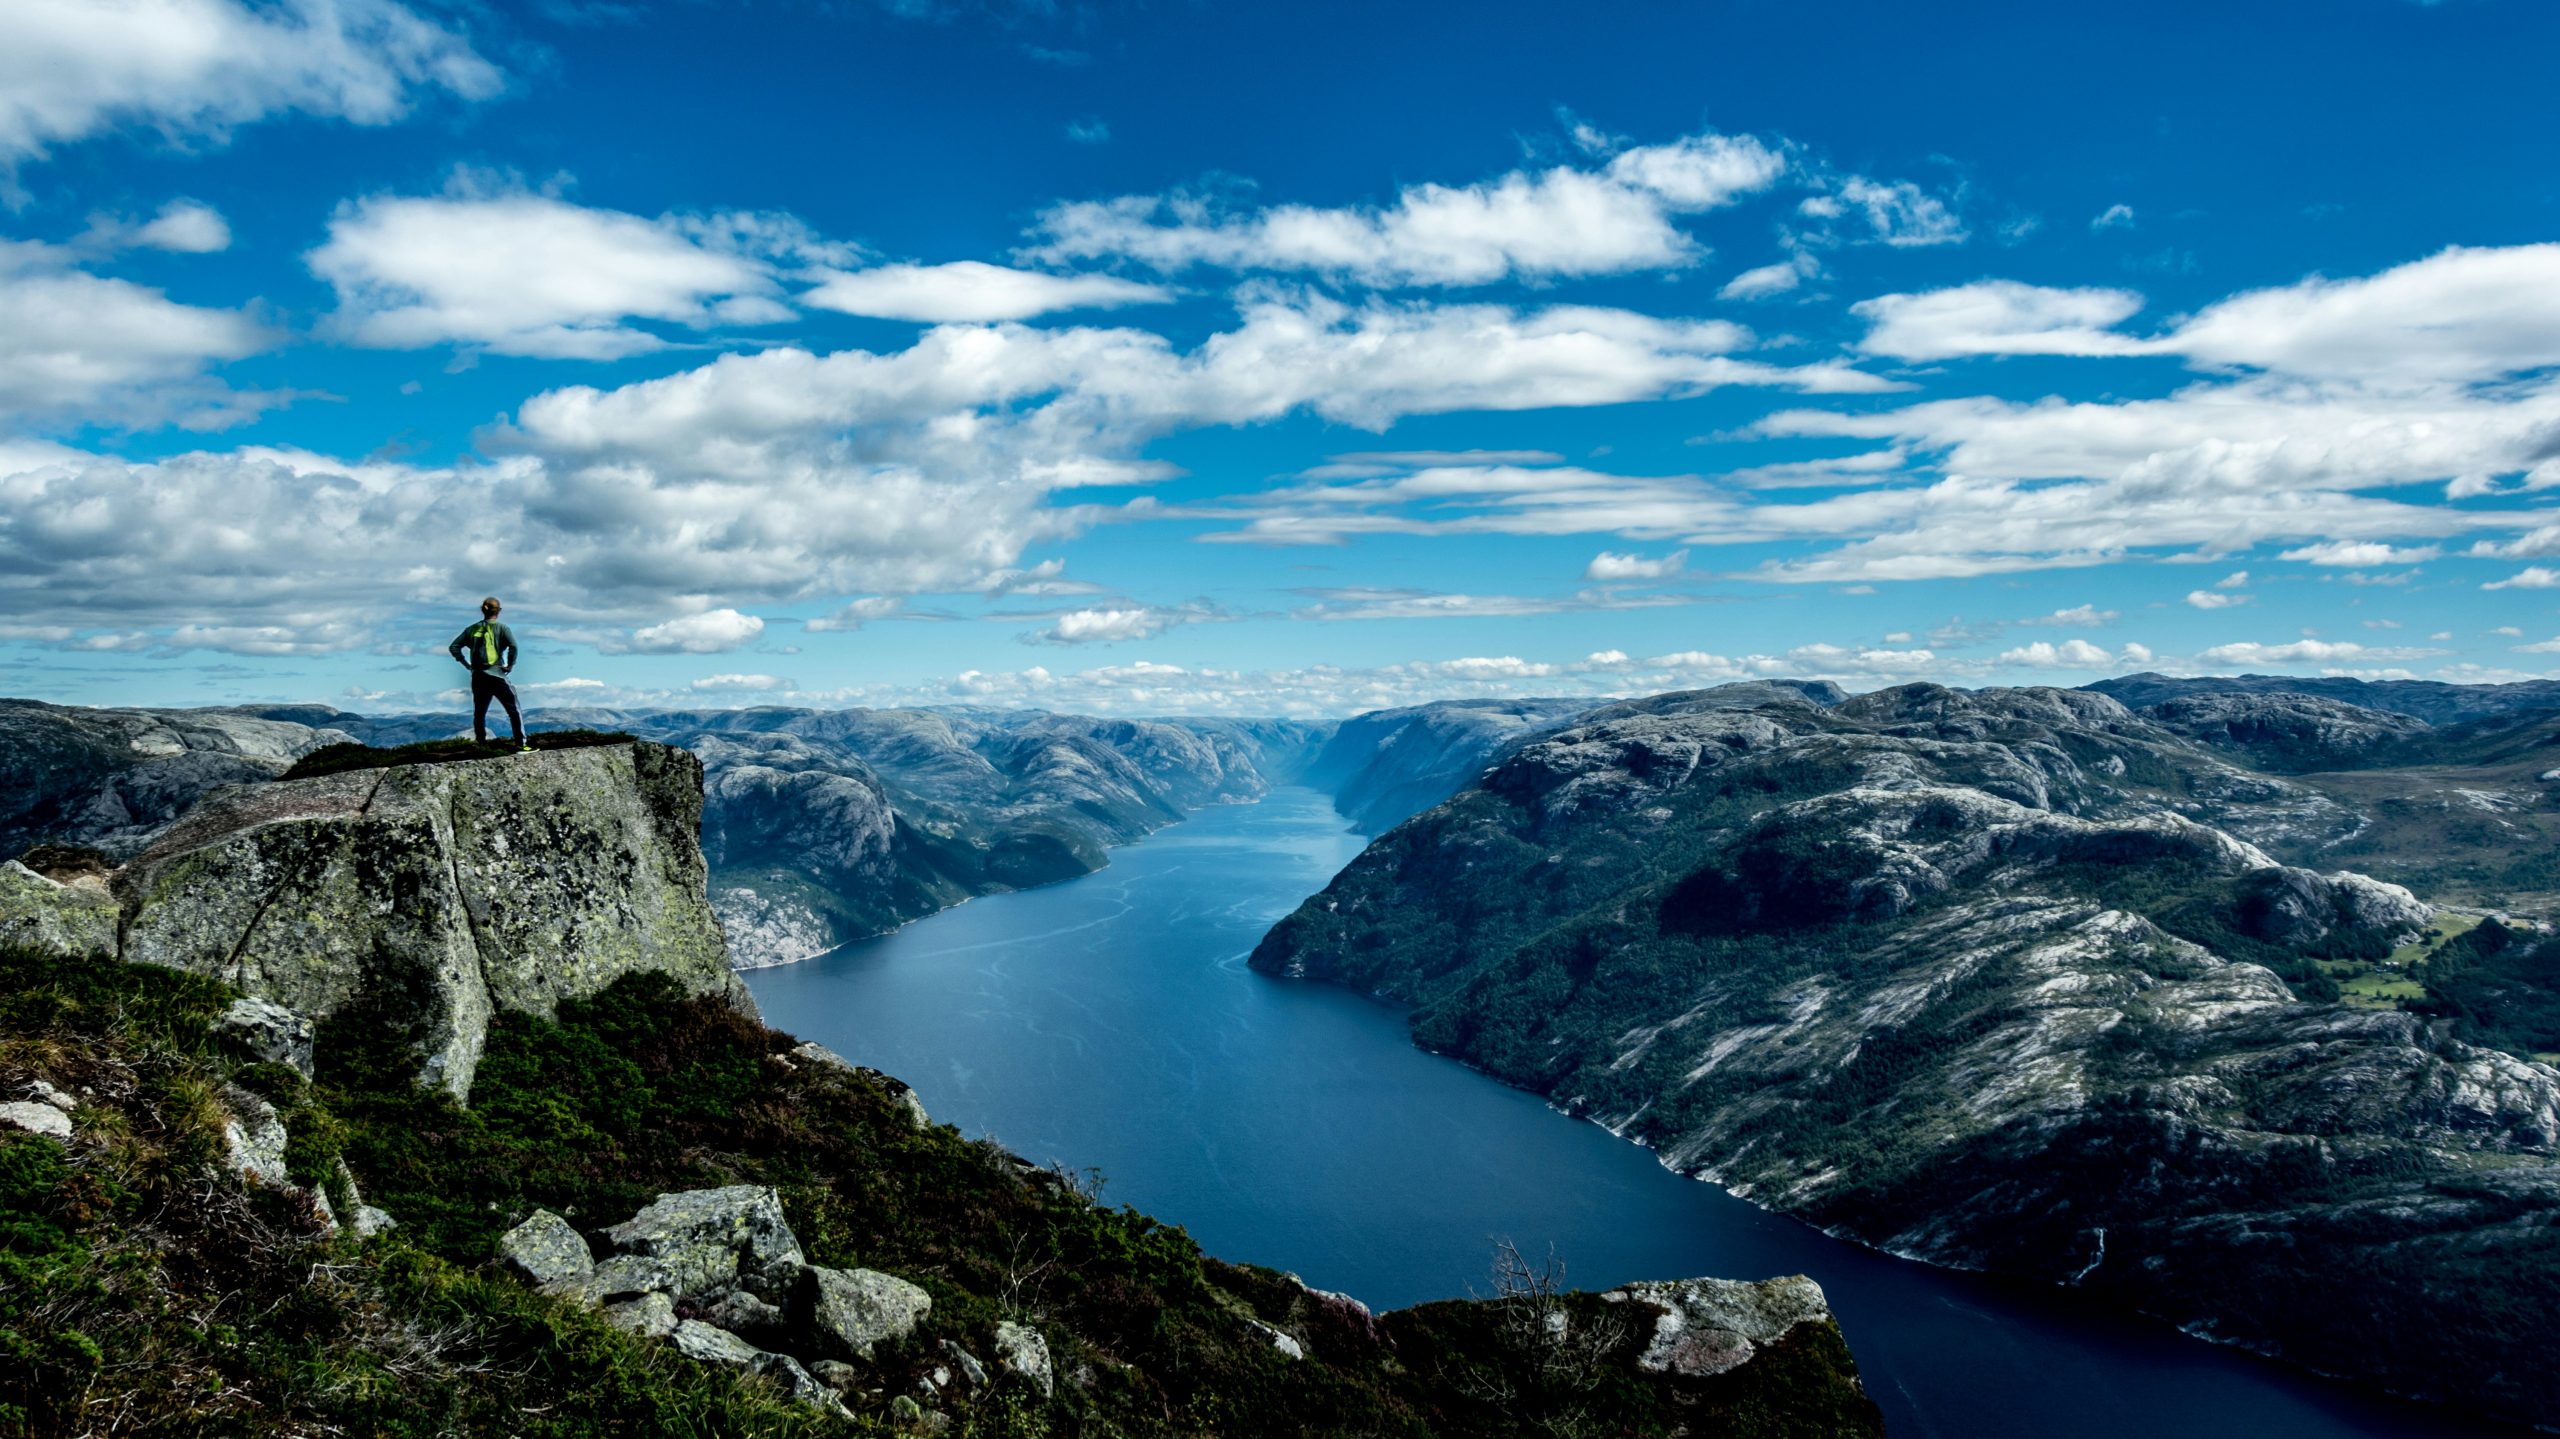 explore the stunning norwegian fjords and experience the beauty of norway's natural landscape on a fjord tour.